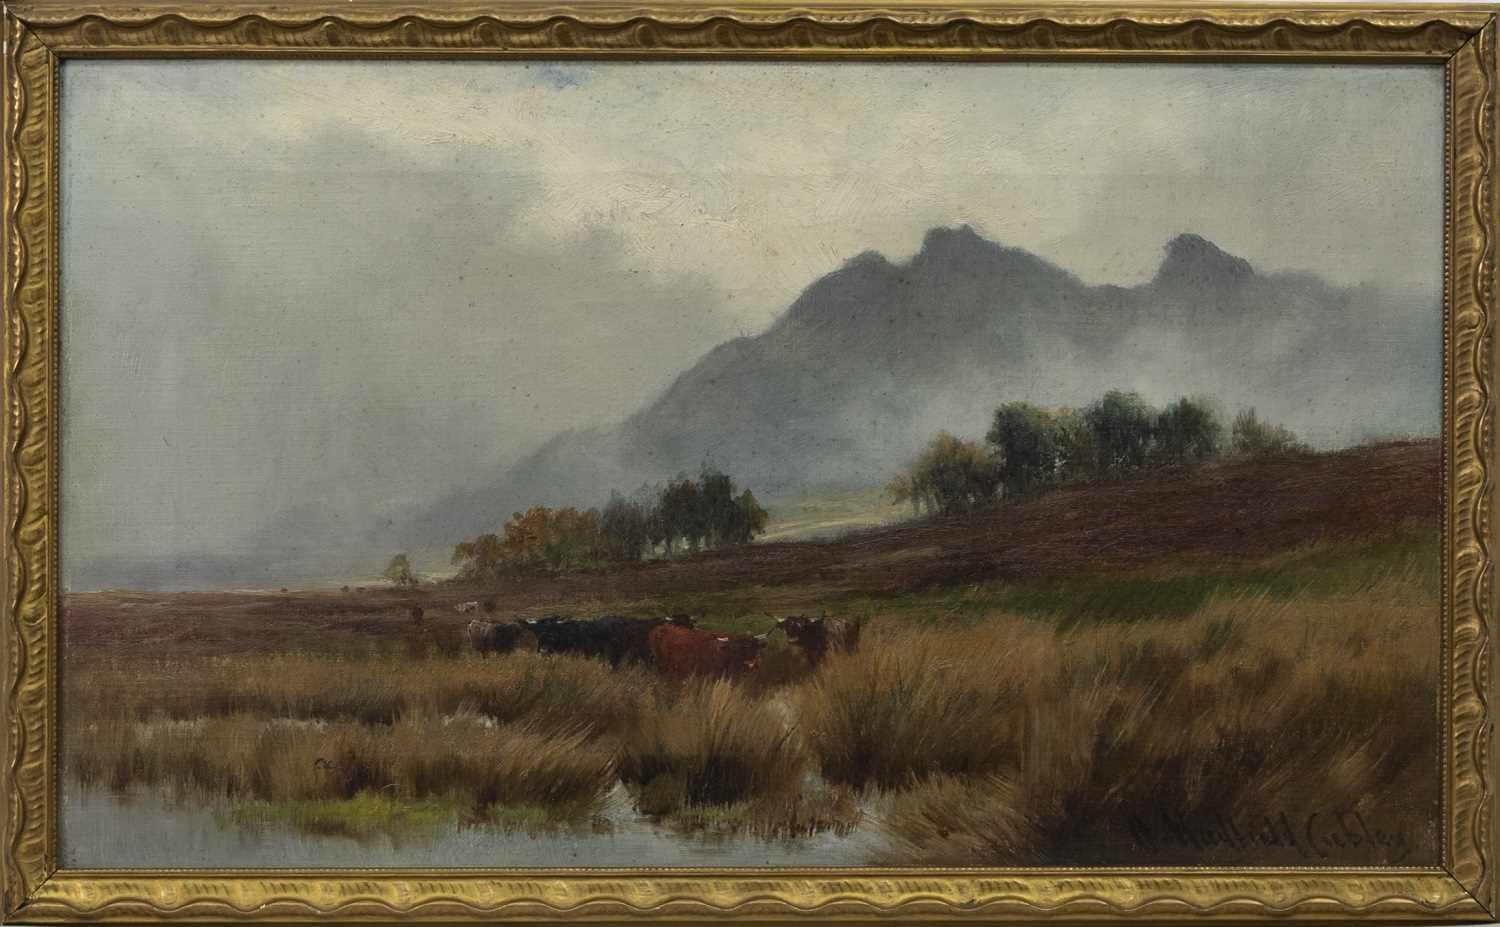 Lot 61 - CATTLE IN THE SCOTTISH HIGHLANDS, A PAIR OF OILS BY HENRY HADFIELD CUBLEY